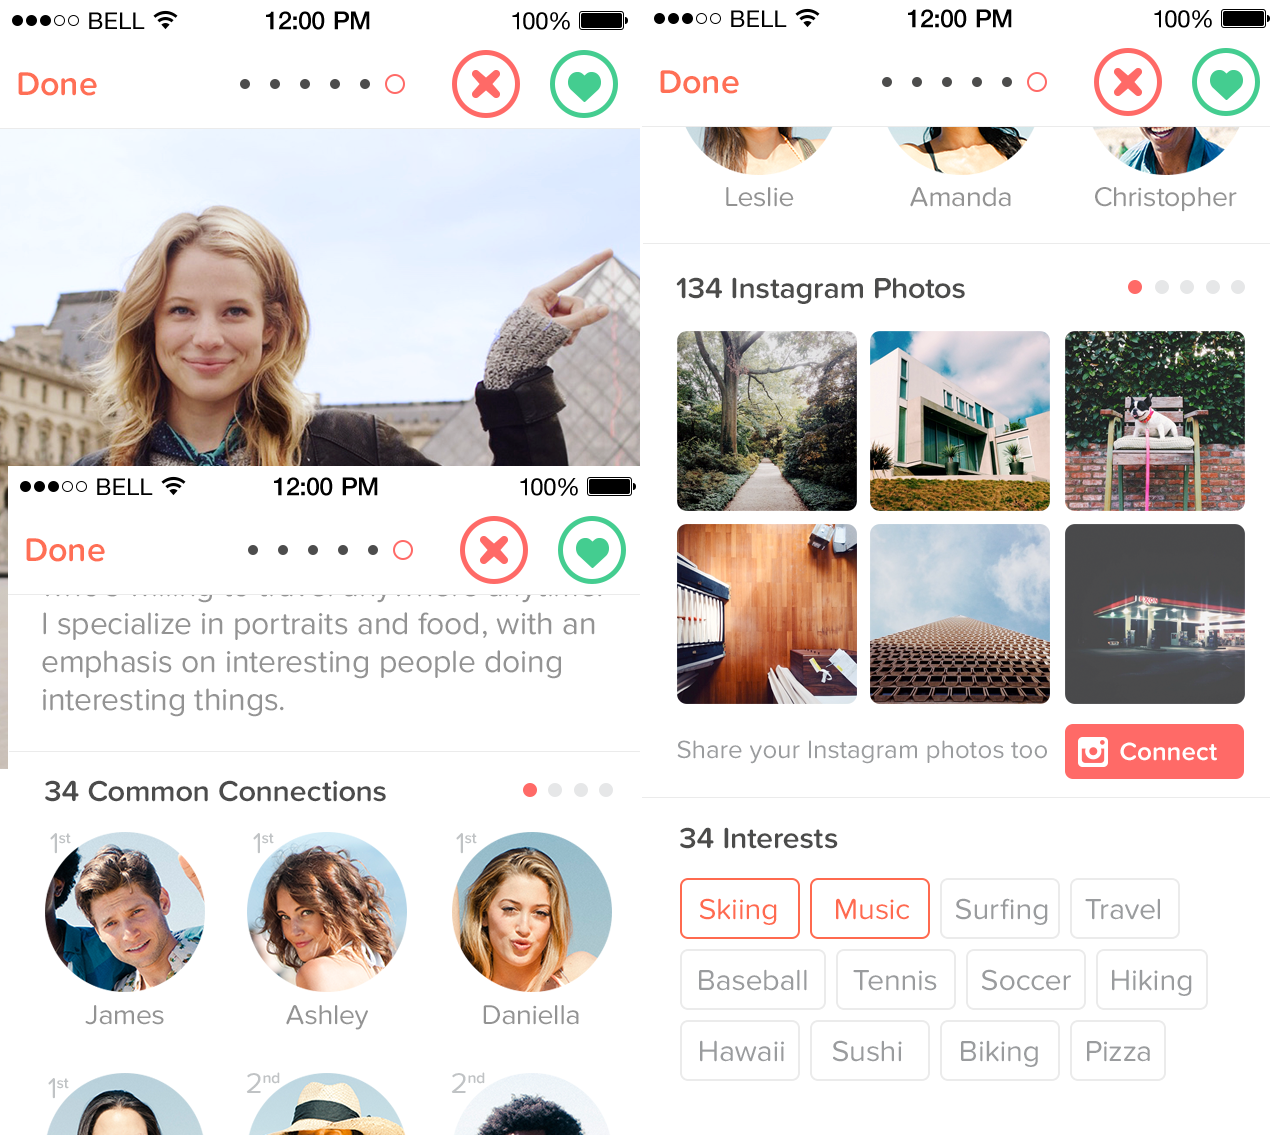 Tinder Adds Ability To Show Off Instagram Photos To Potential Matches Los Angeles Times